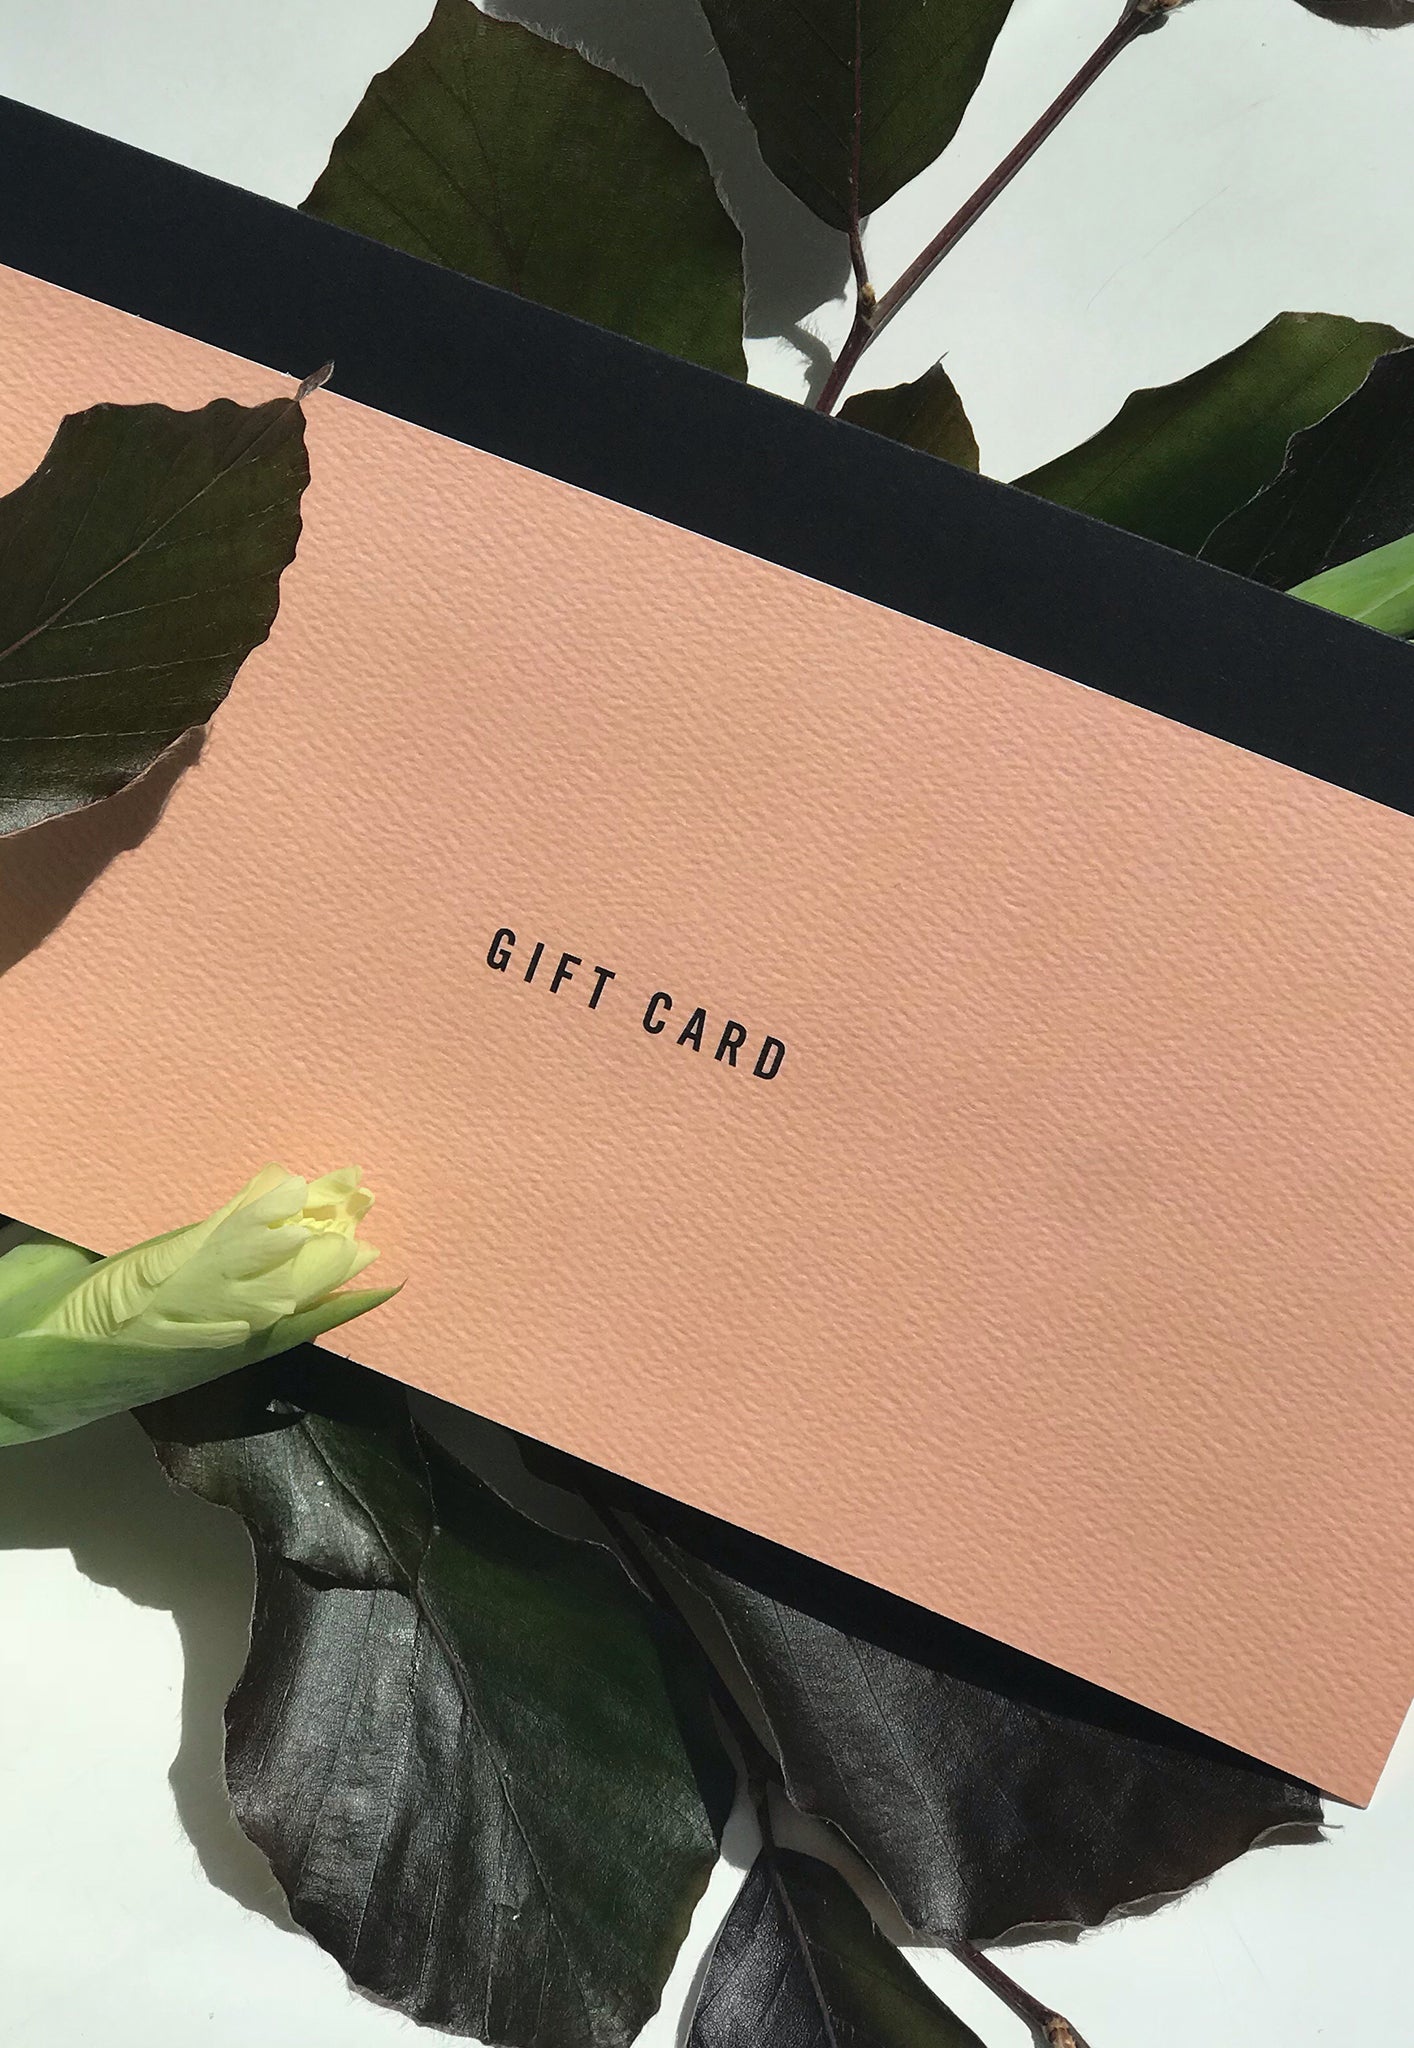 Gift Card sold by Angel Divine